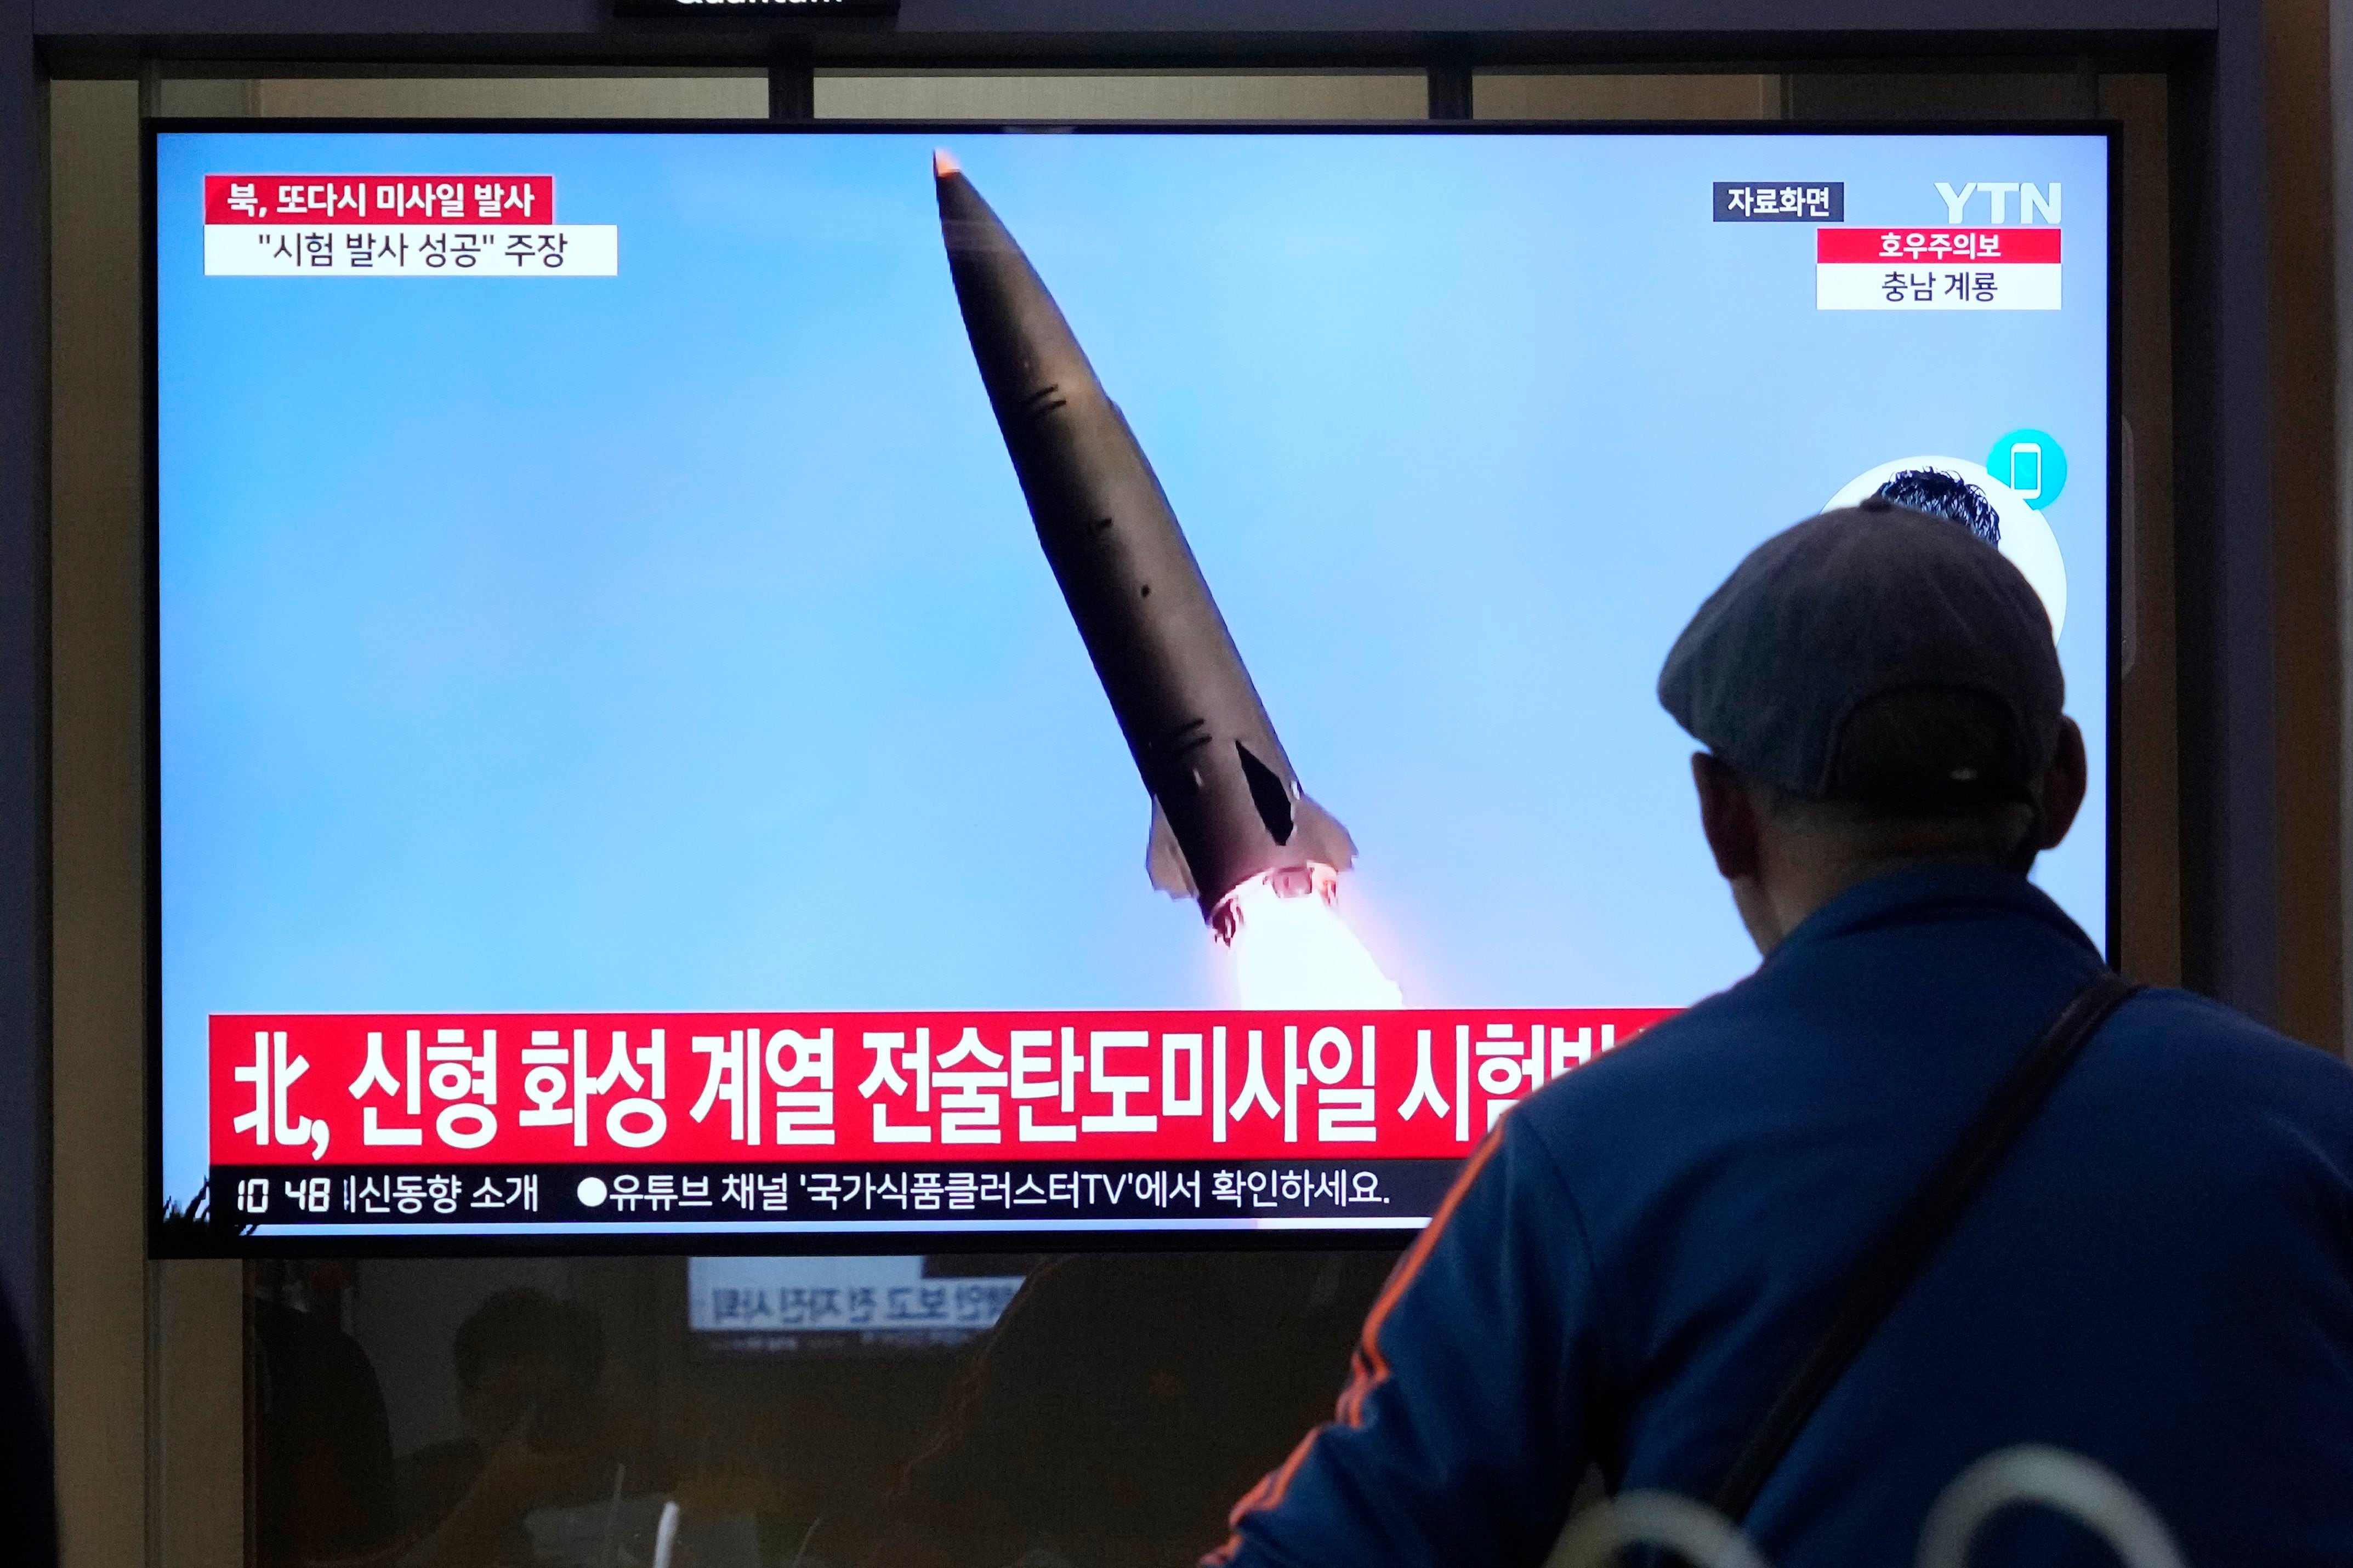 North Korea says its recent missile tests involved new ballistic missile with 'super-large warhead' thumbnail